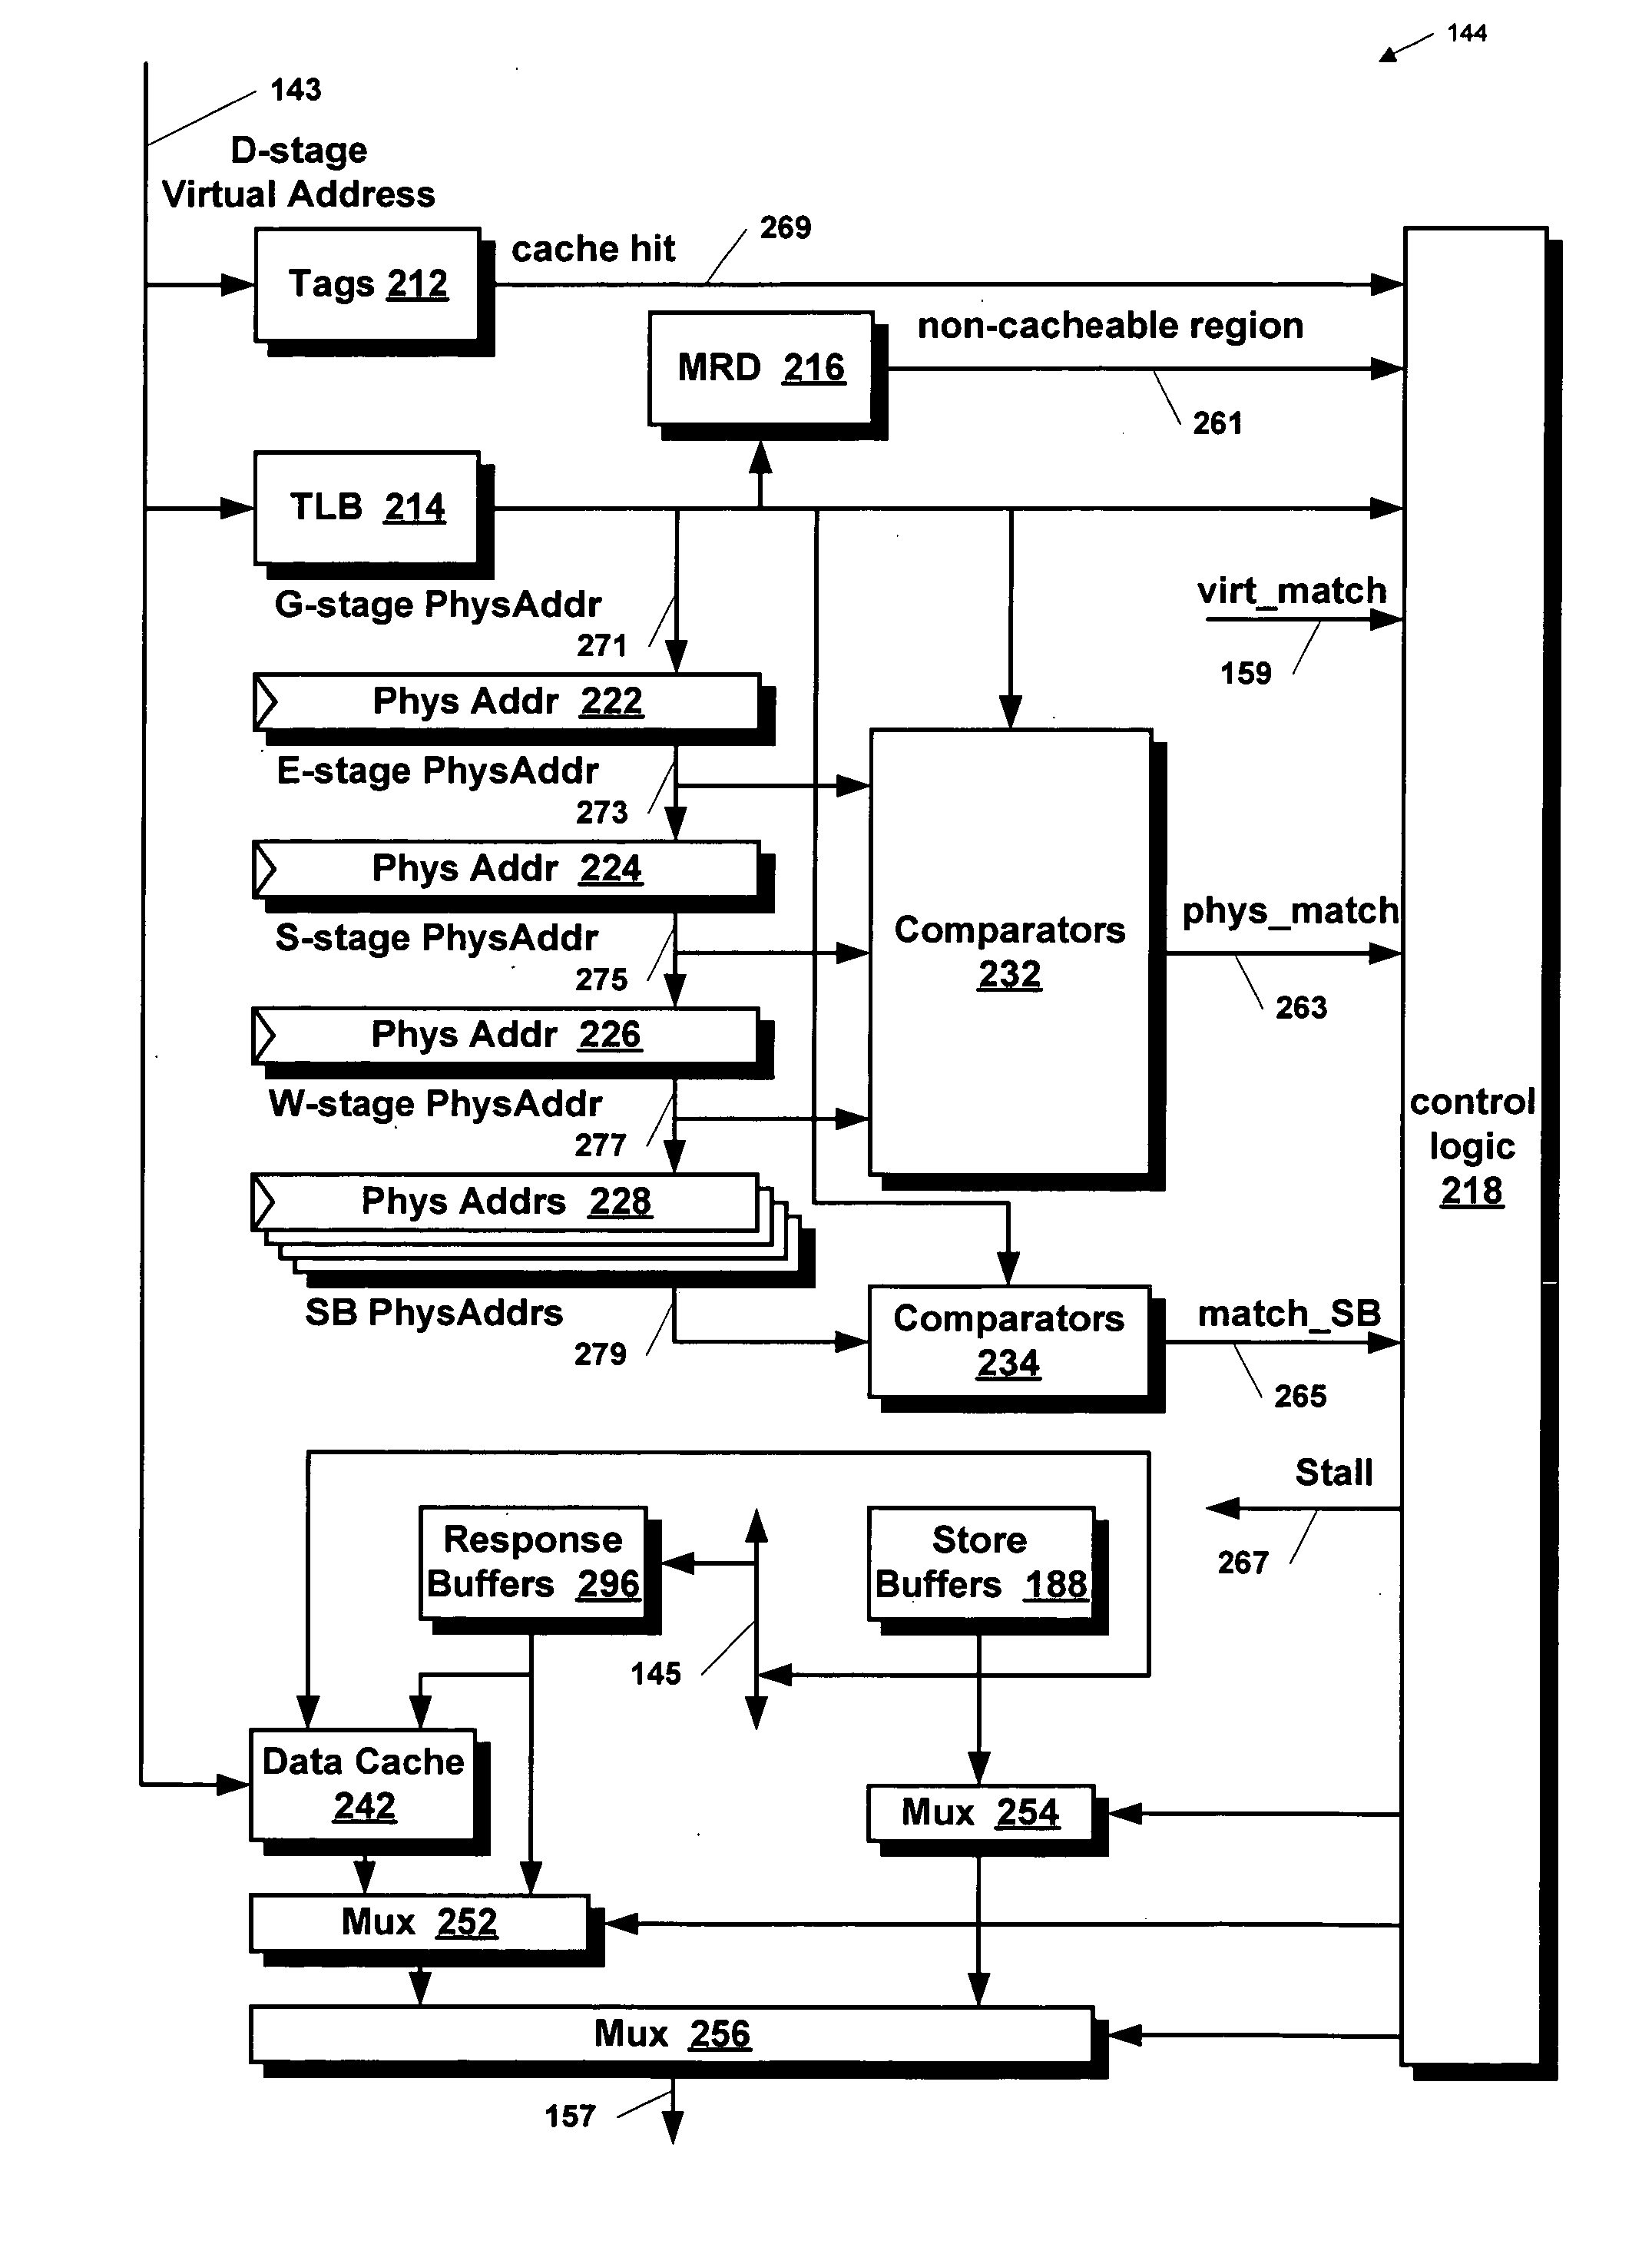 Method and apparatus for speculatively forwarding storehit data in a hierarchical manner